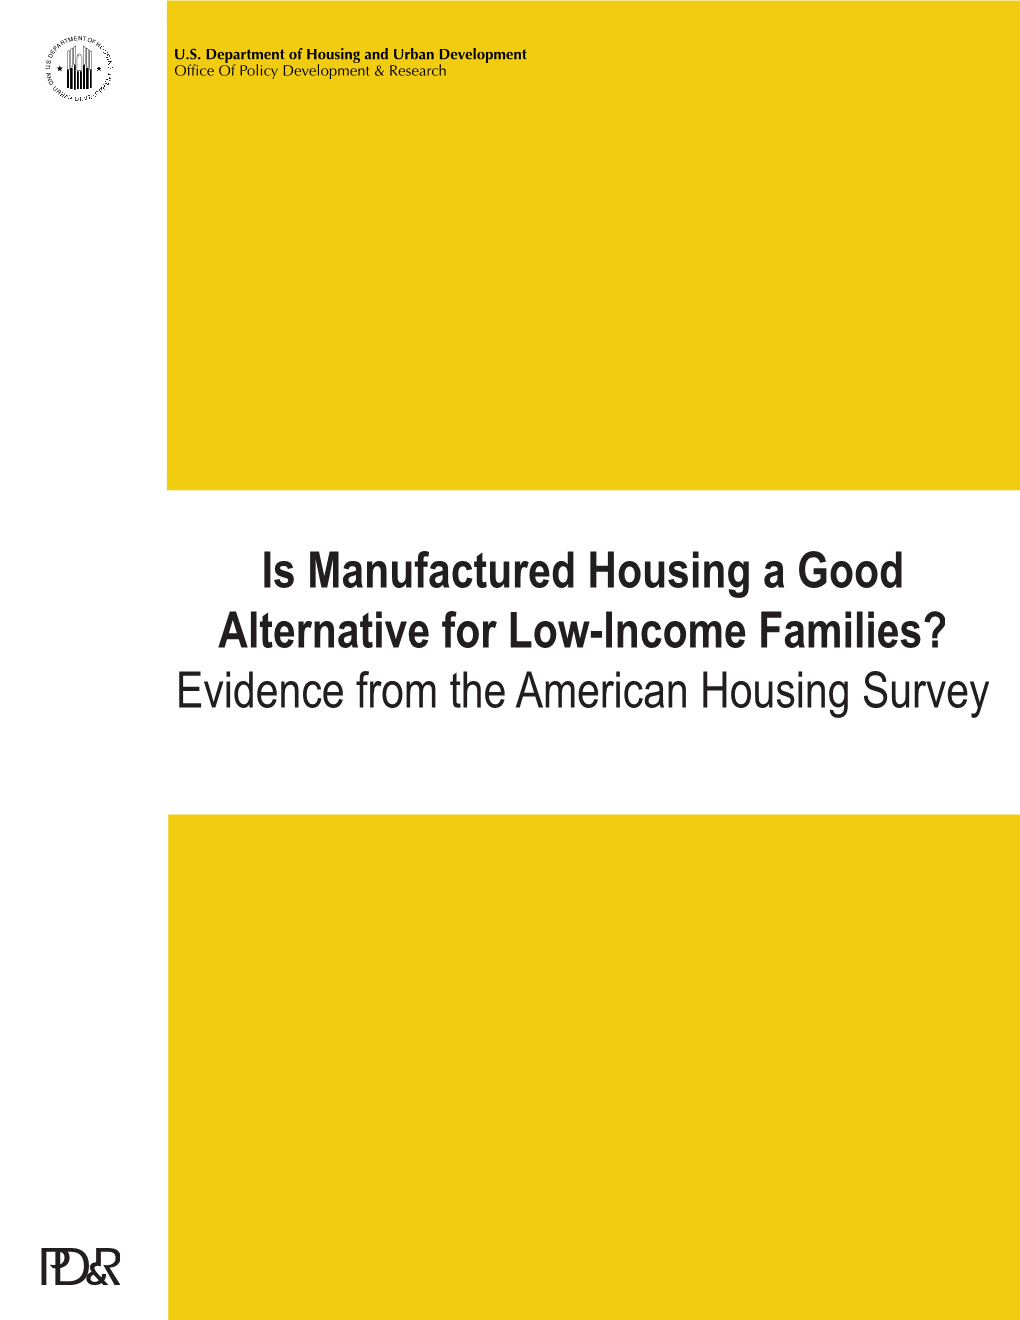 Is Manufactured Housing a Good Alternative for Low-Income Families? Evidence from the American Housing Survey